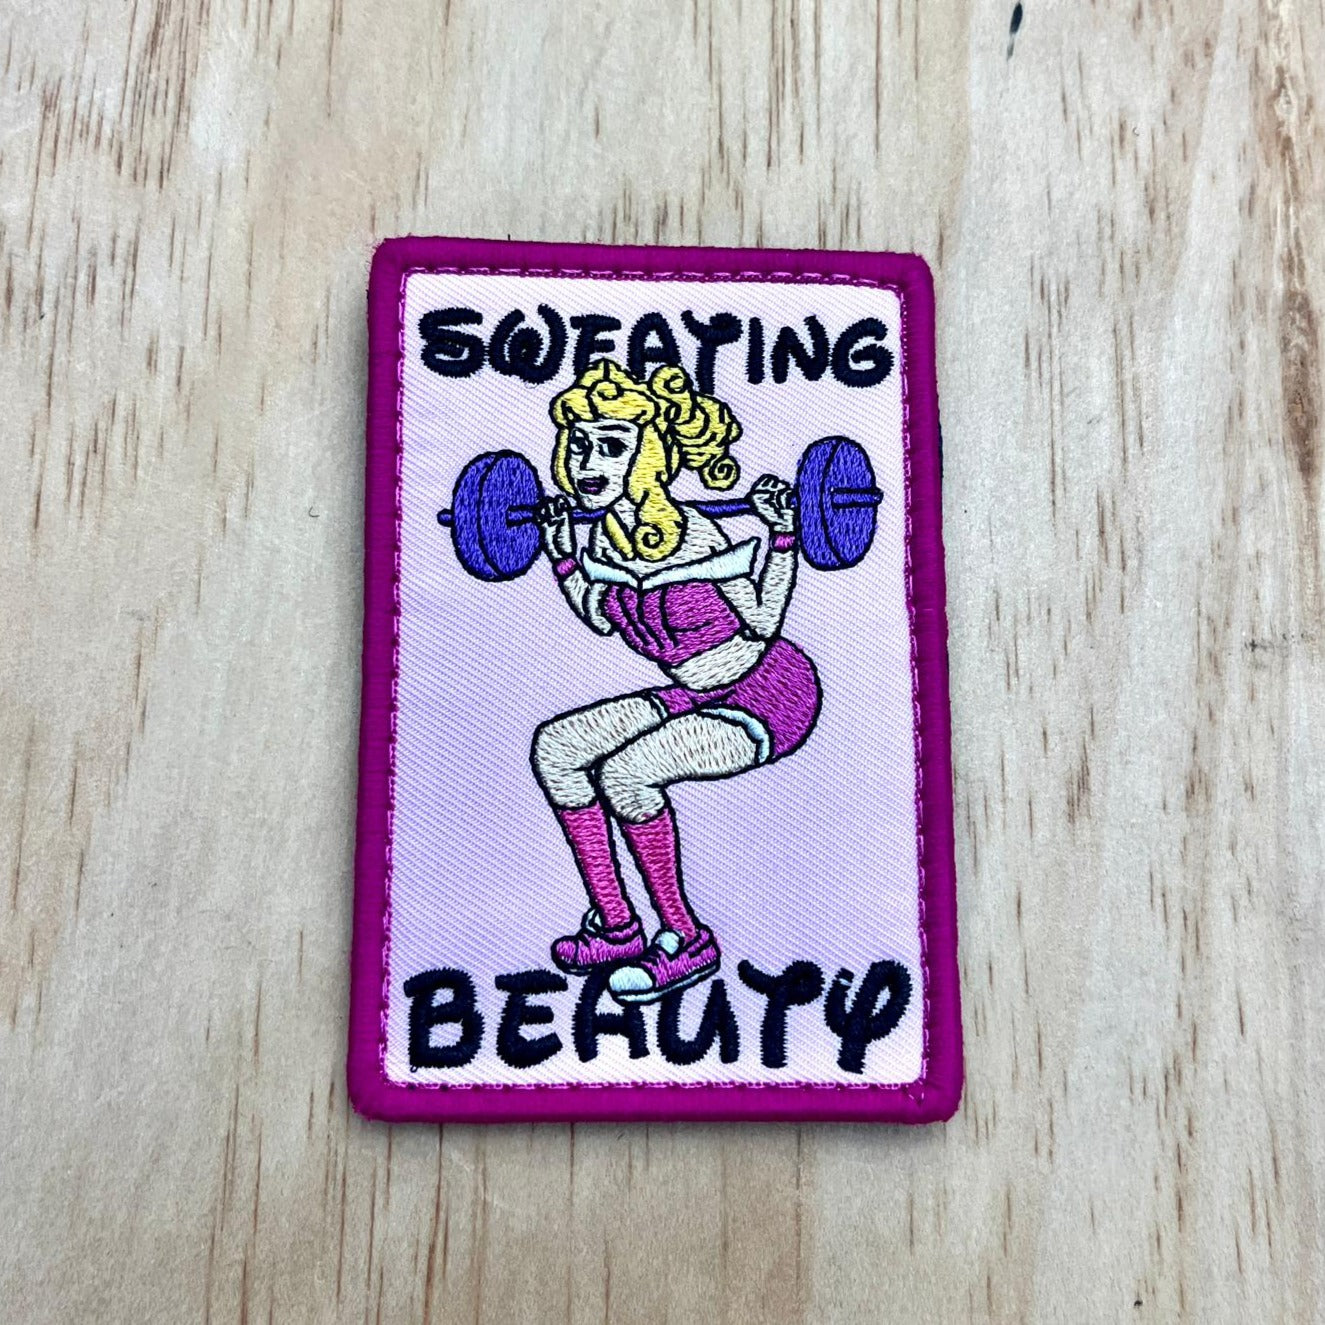 Sweating Beauty patch